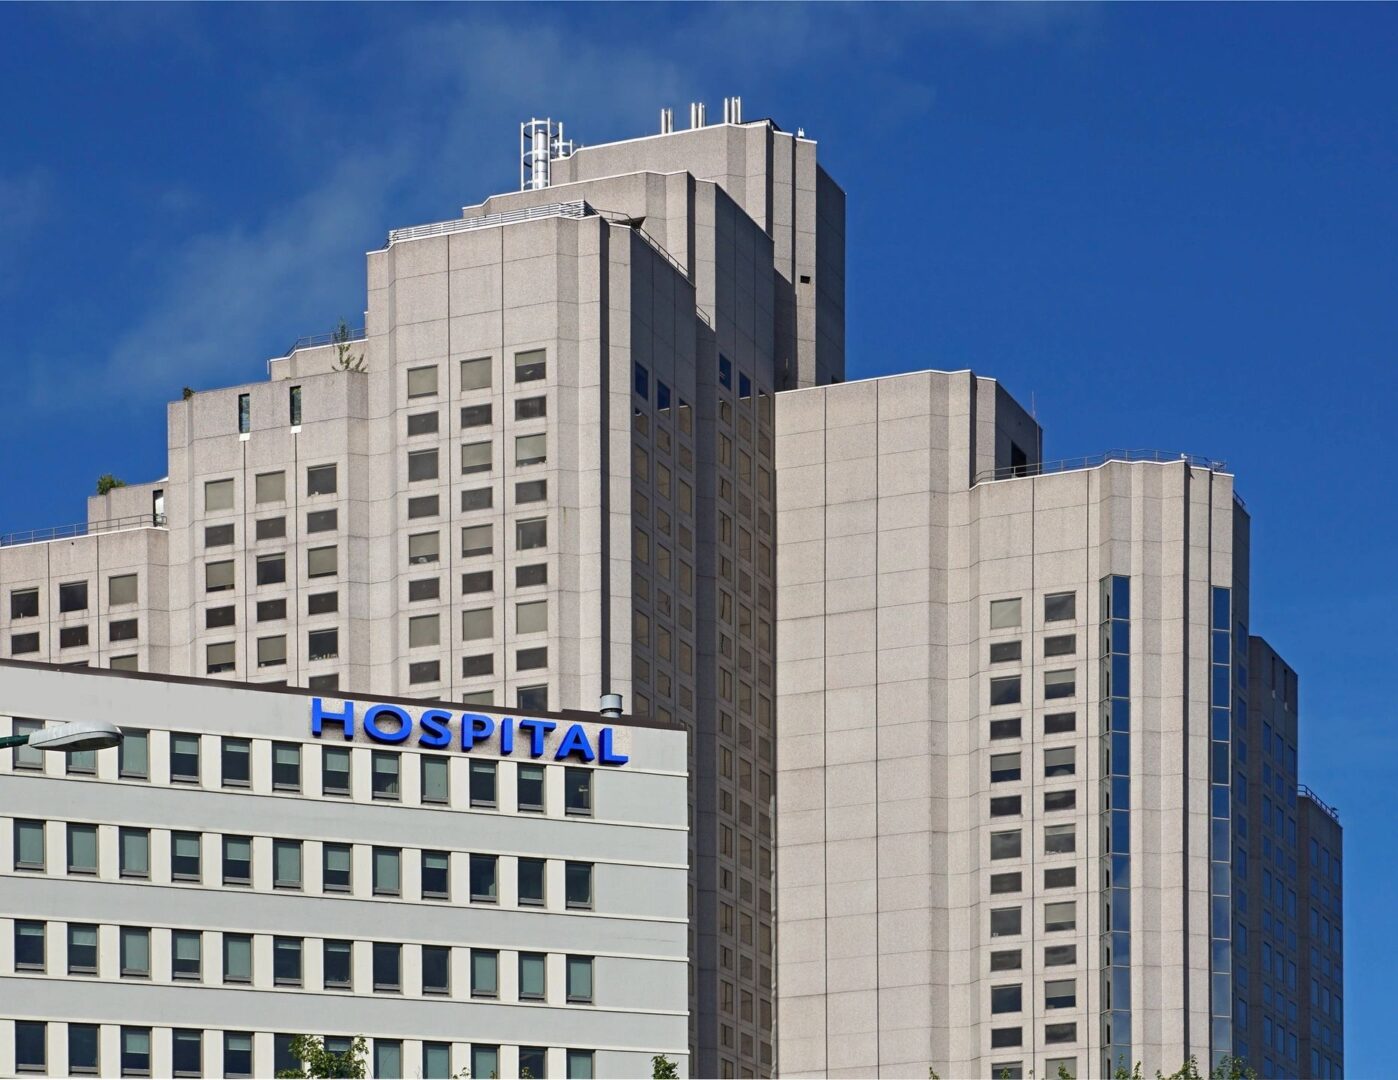 A large building with many windows and a blue hospital sign.